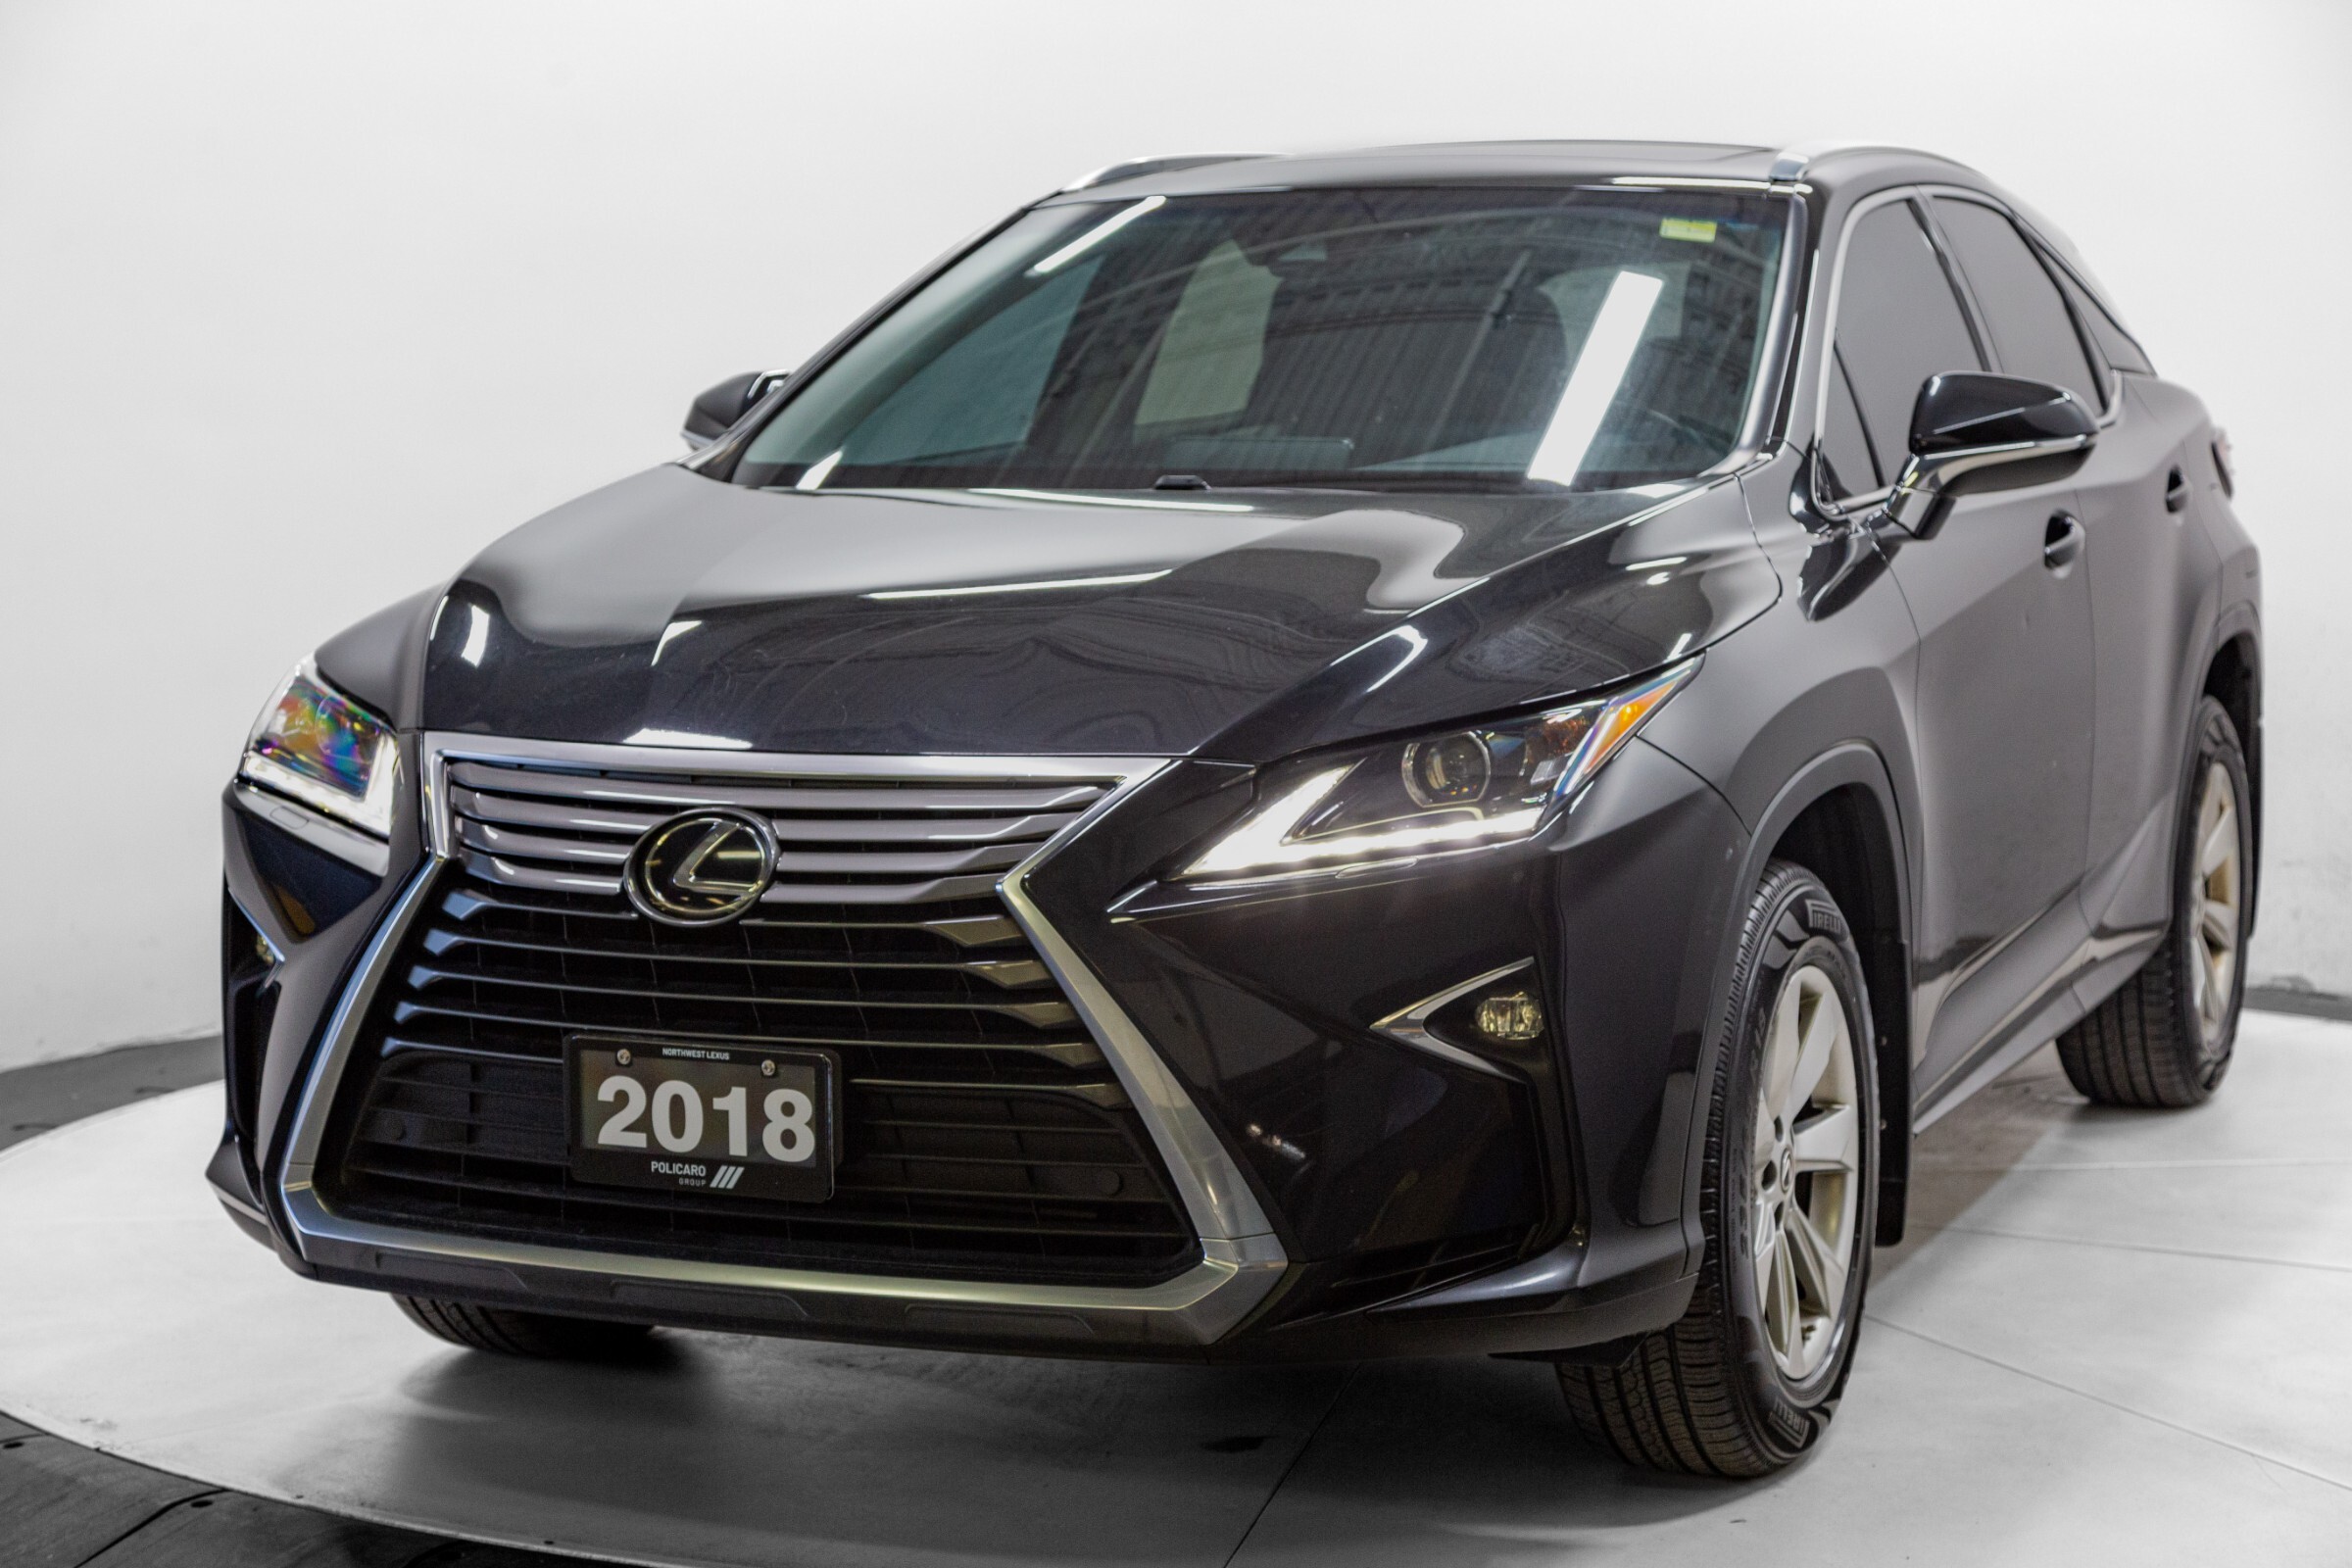 2018 Lexus RX 350 NAVIGATION PACKAGE | SAFETY CERTIFIED